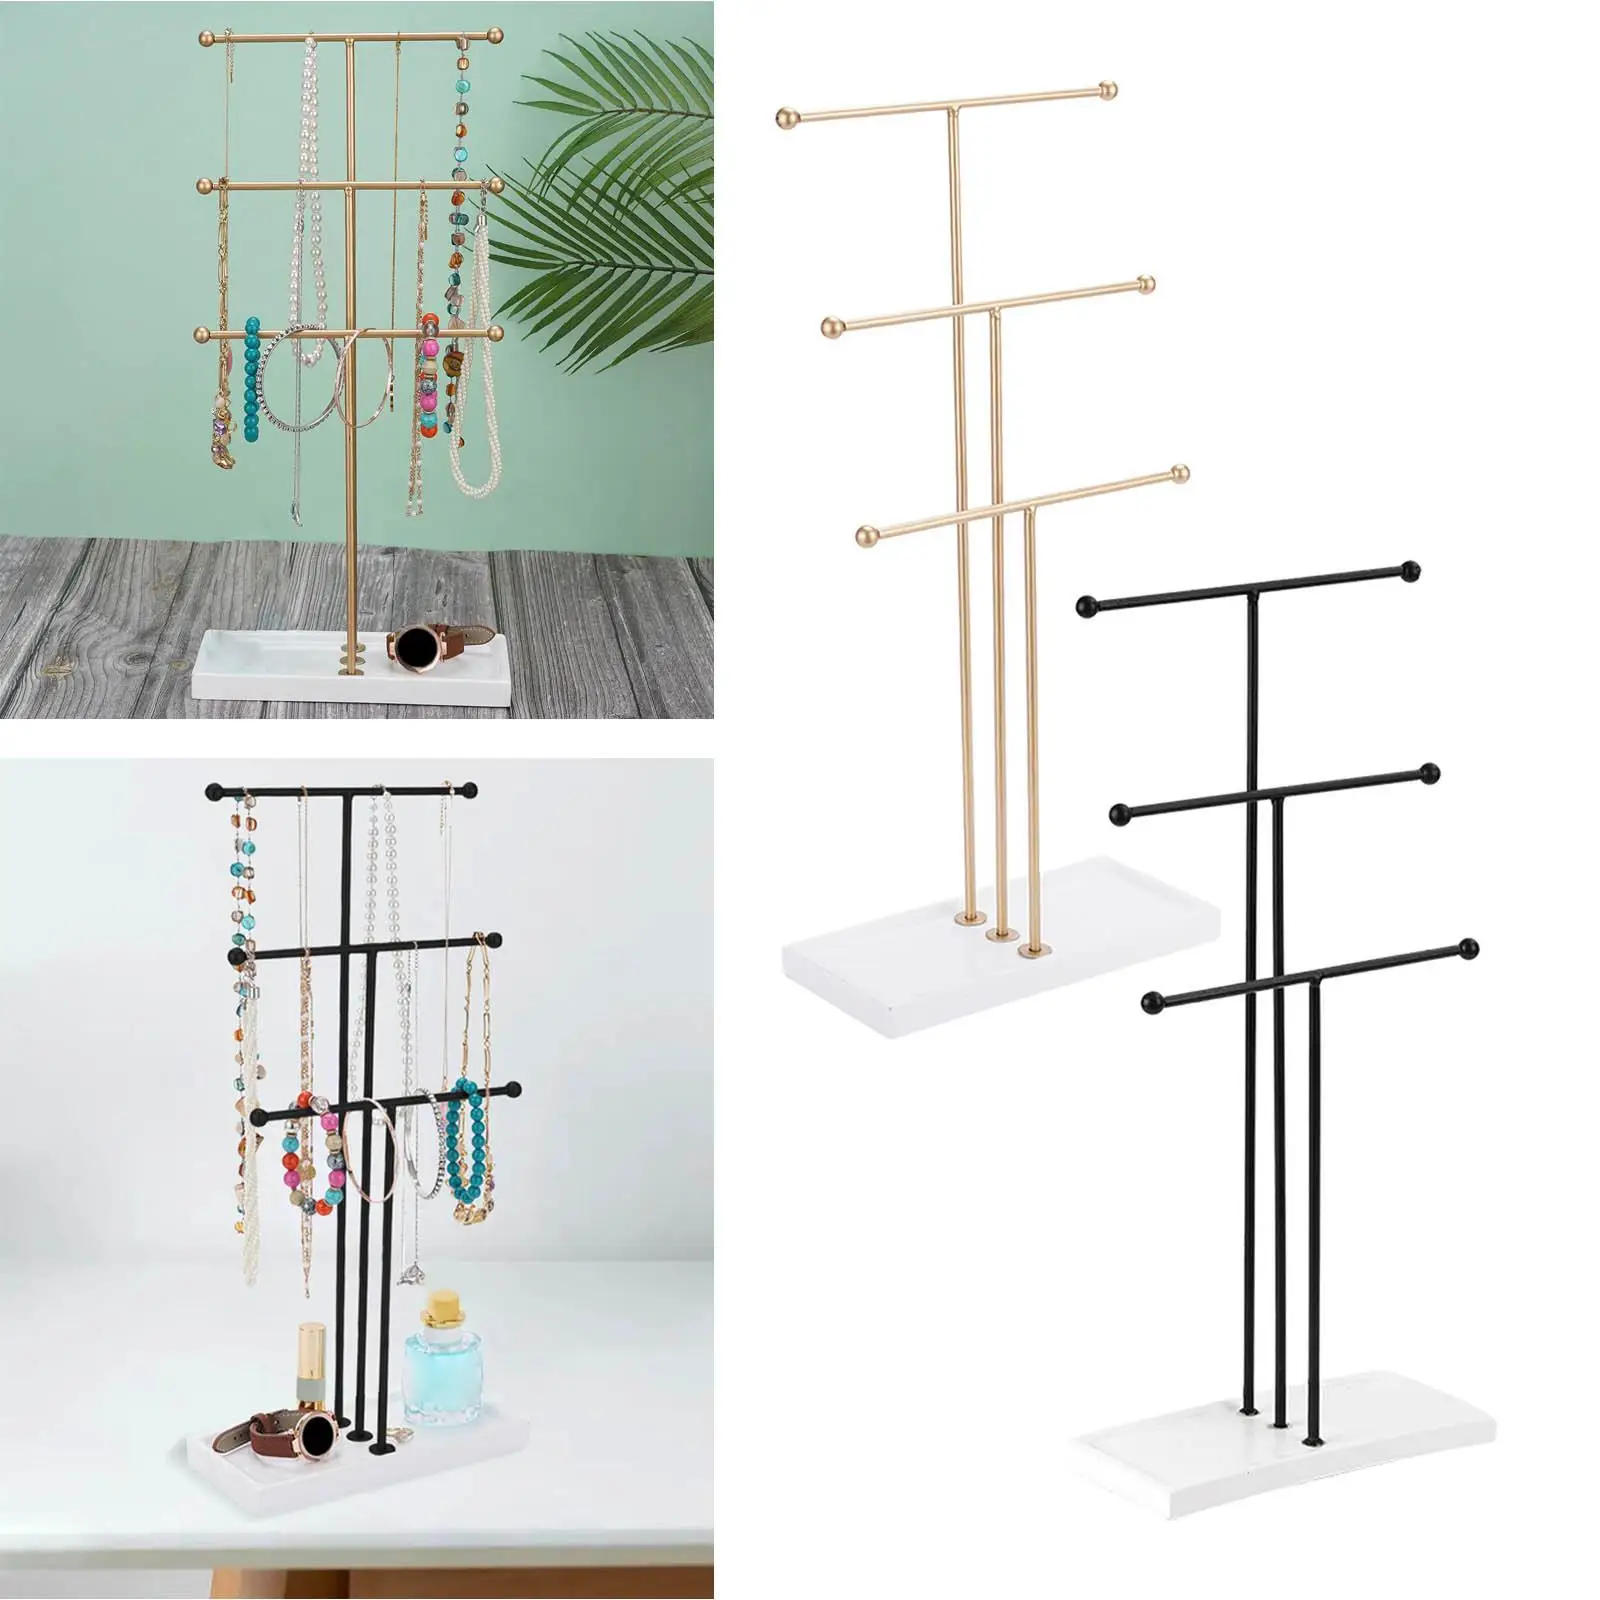 Table Top 3 Tiered Bars Necklace Display Stand, for Displaying, Storing and Organizing Necklace Holder with Resin Base